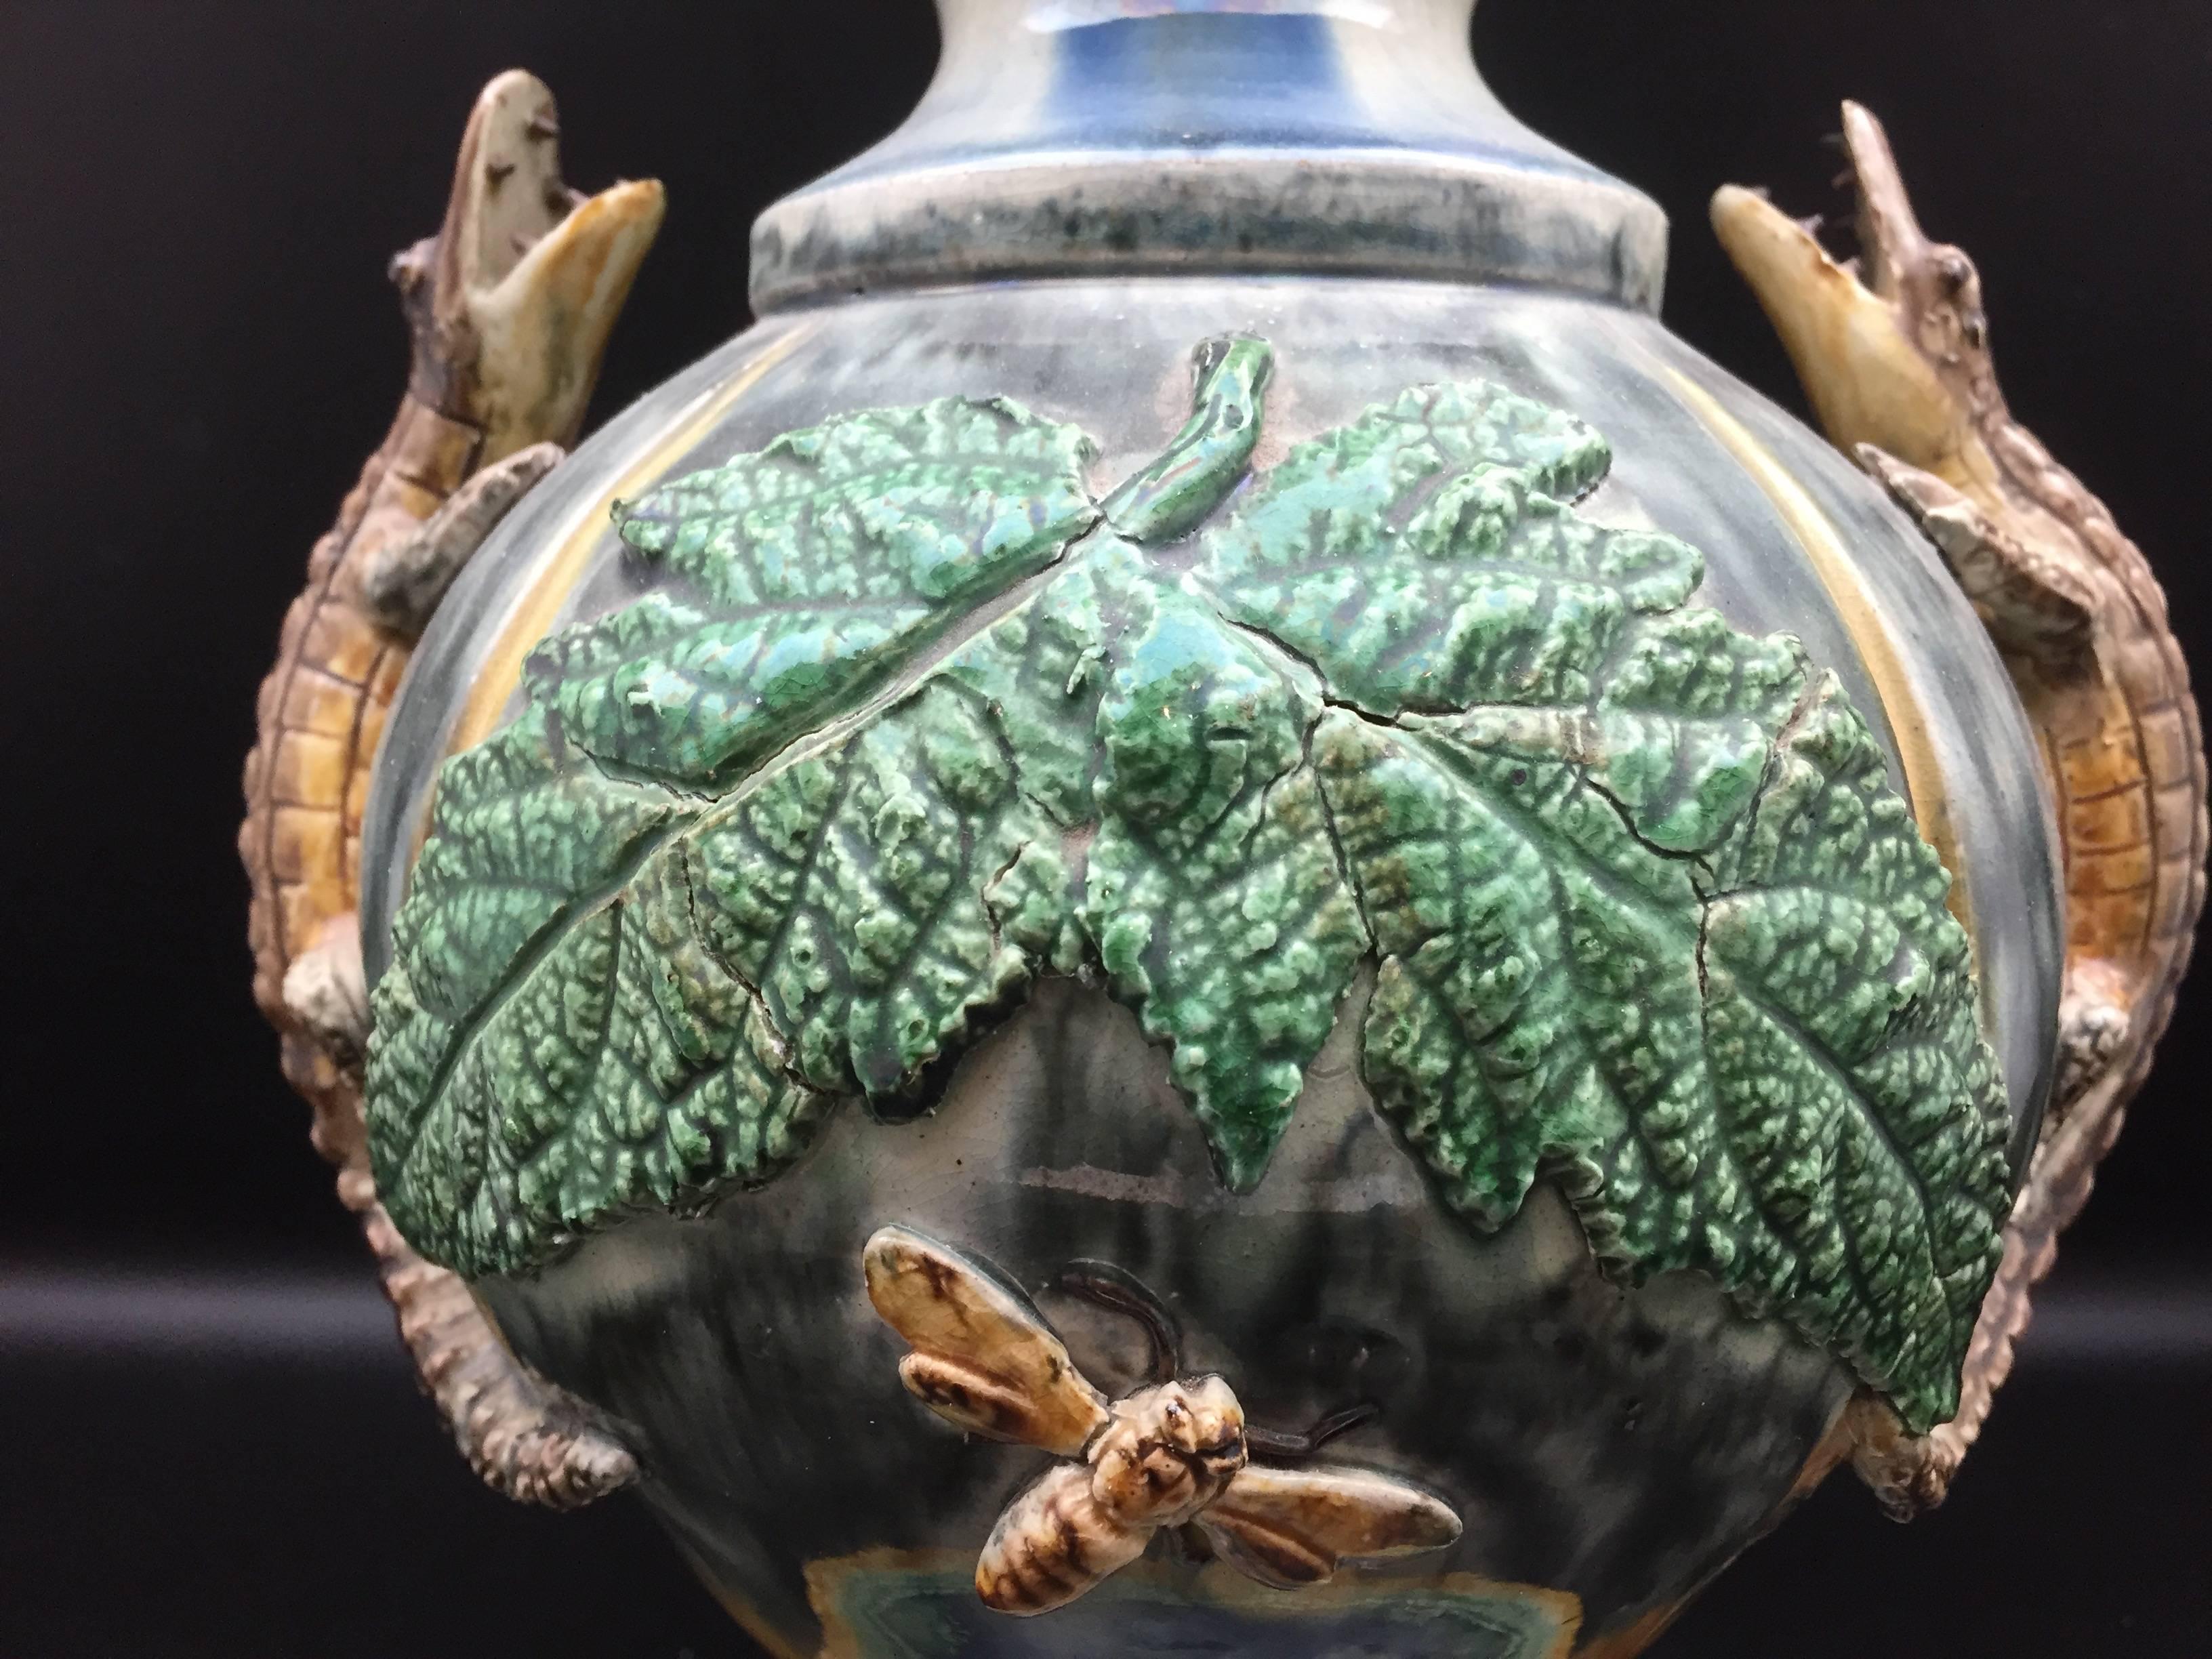 Glazed Late 19th Century Majolica Palissy Vase with Snake, Alligator Frog and Bee Decor